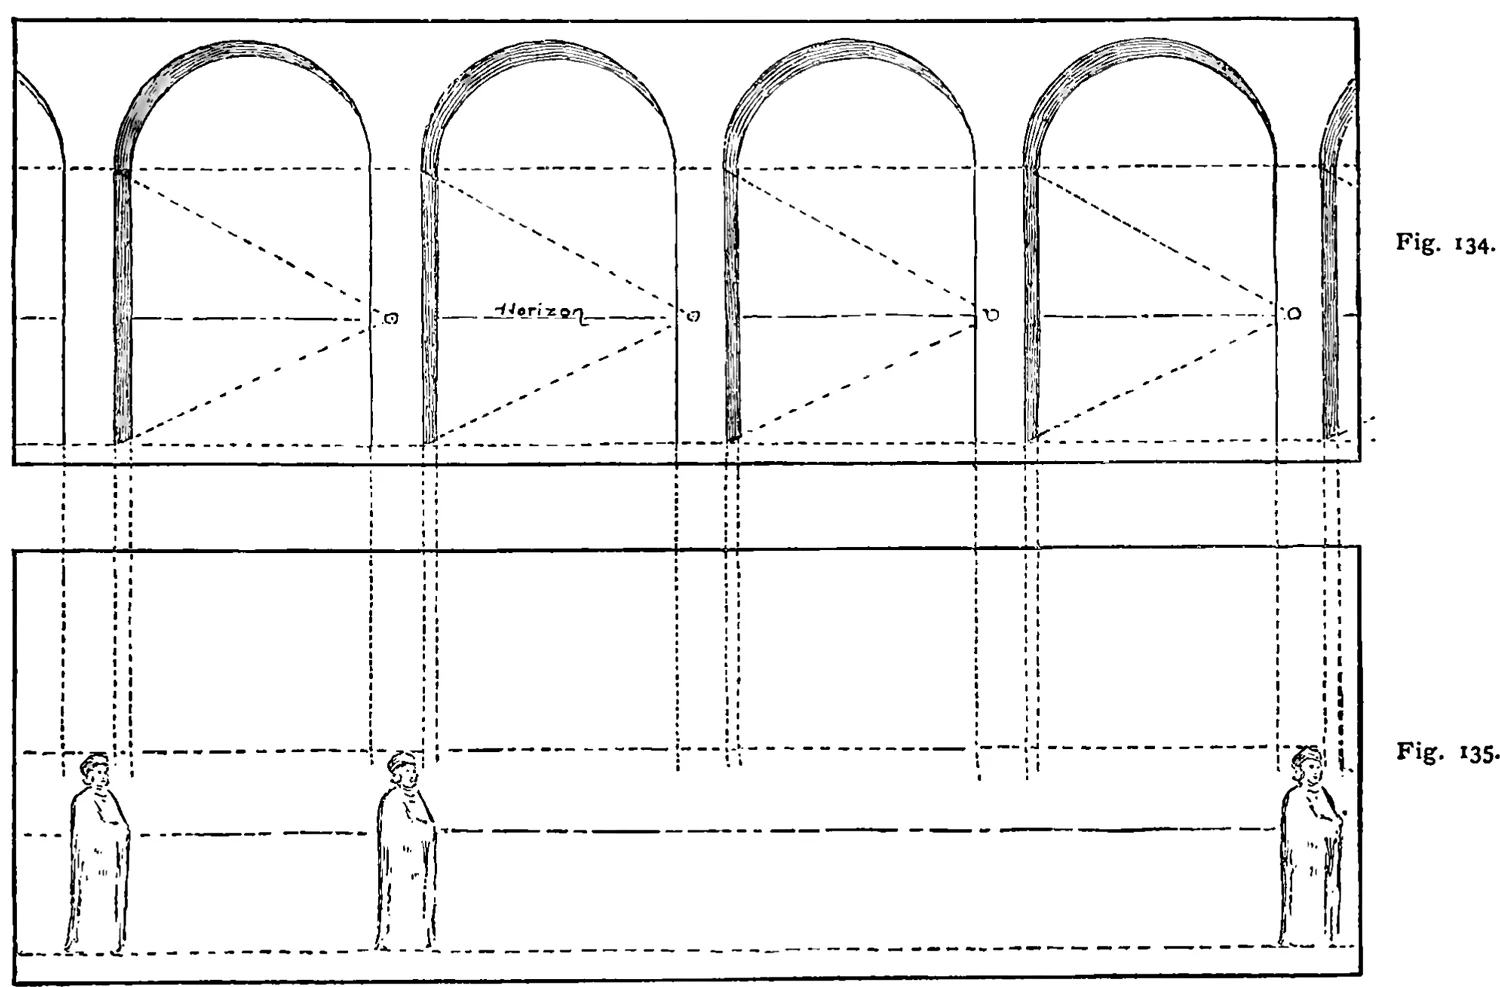 30 Types of Architectural Arches (with Illustrated Diagrams)